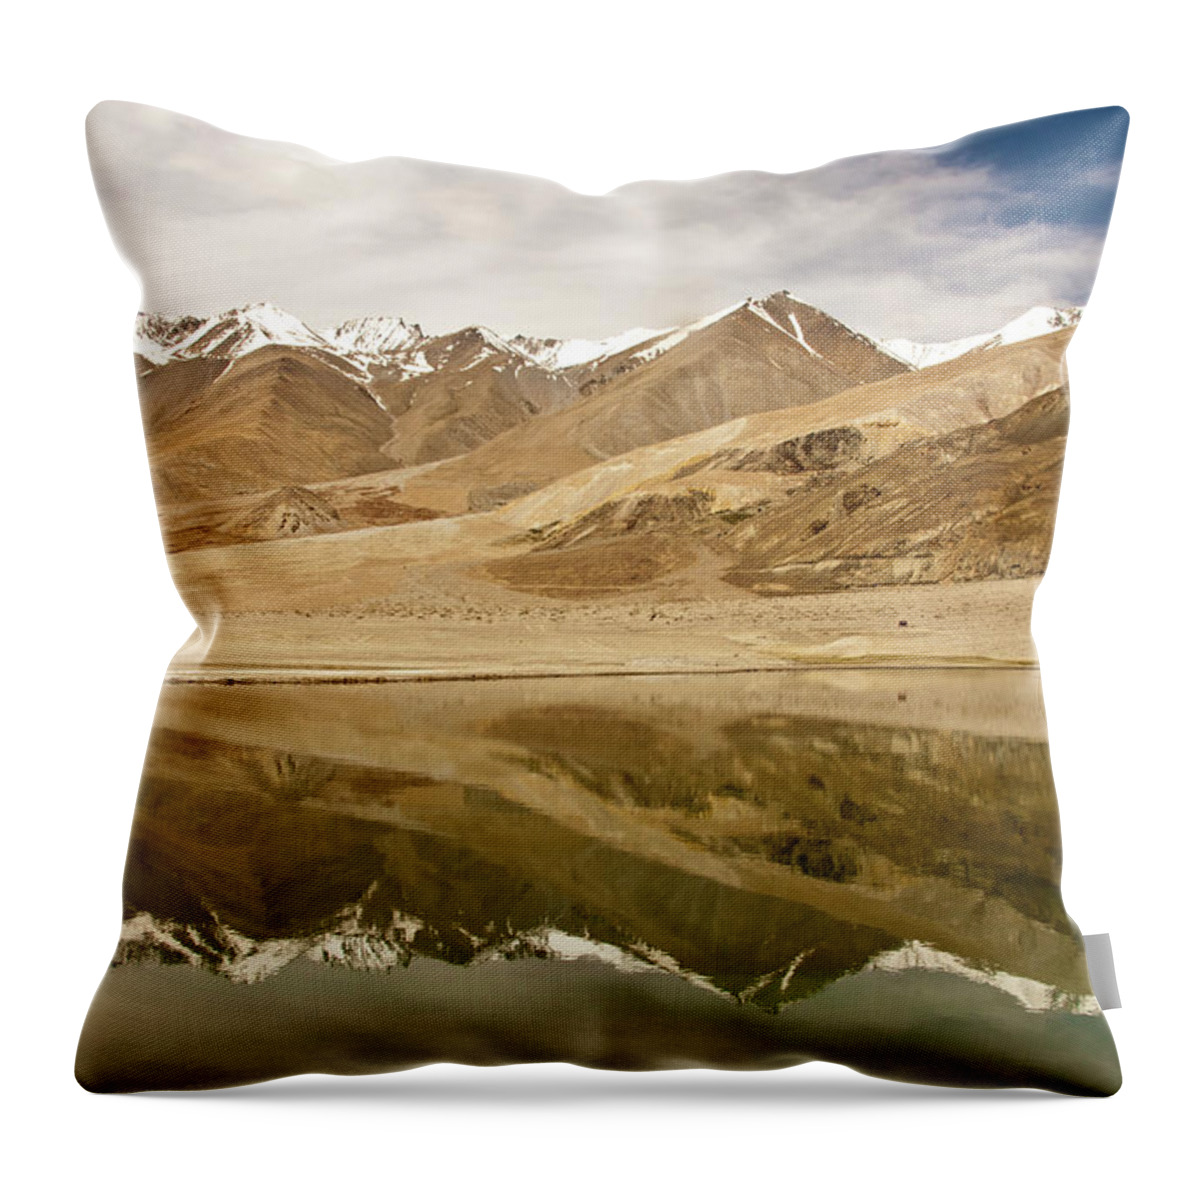 Scenics Throw Pillow featuring the photograph Snow-capped Mountain Reflection by Www.victoriawlaka.com